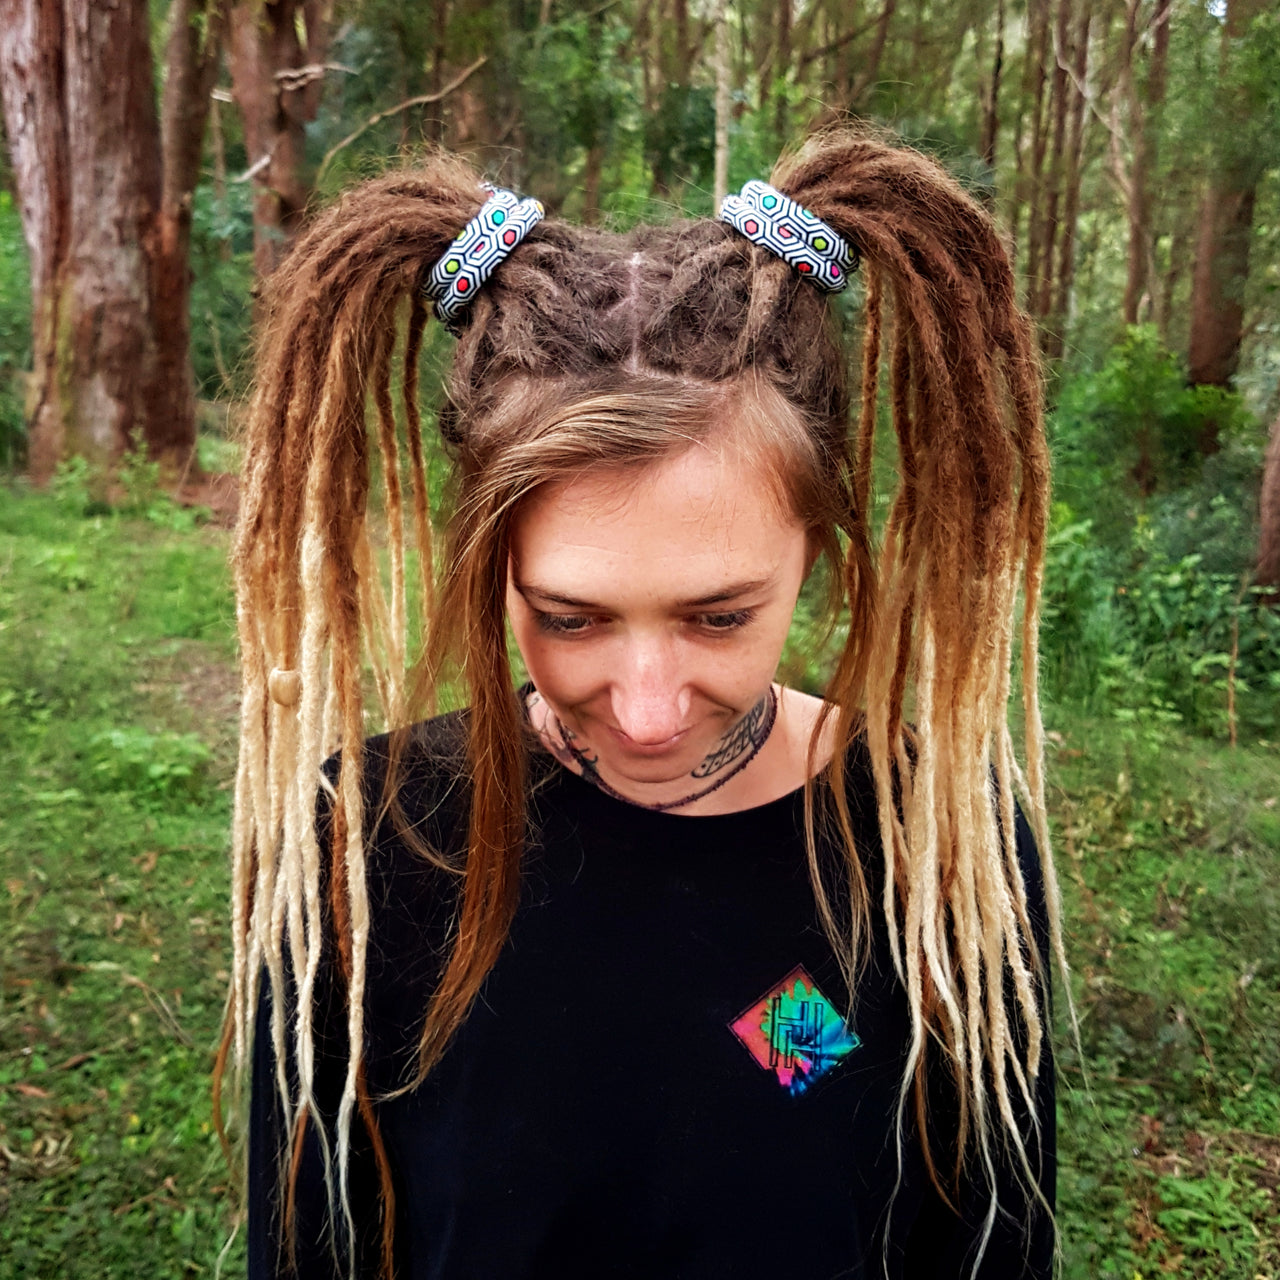 Spiralock Accessories for Dreads by Dreadshop